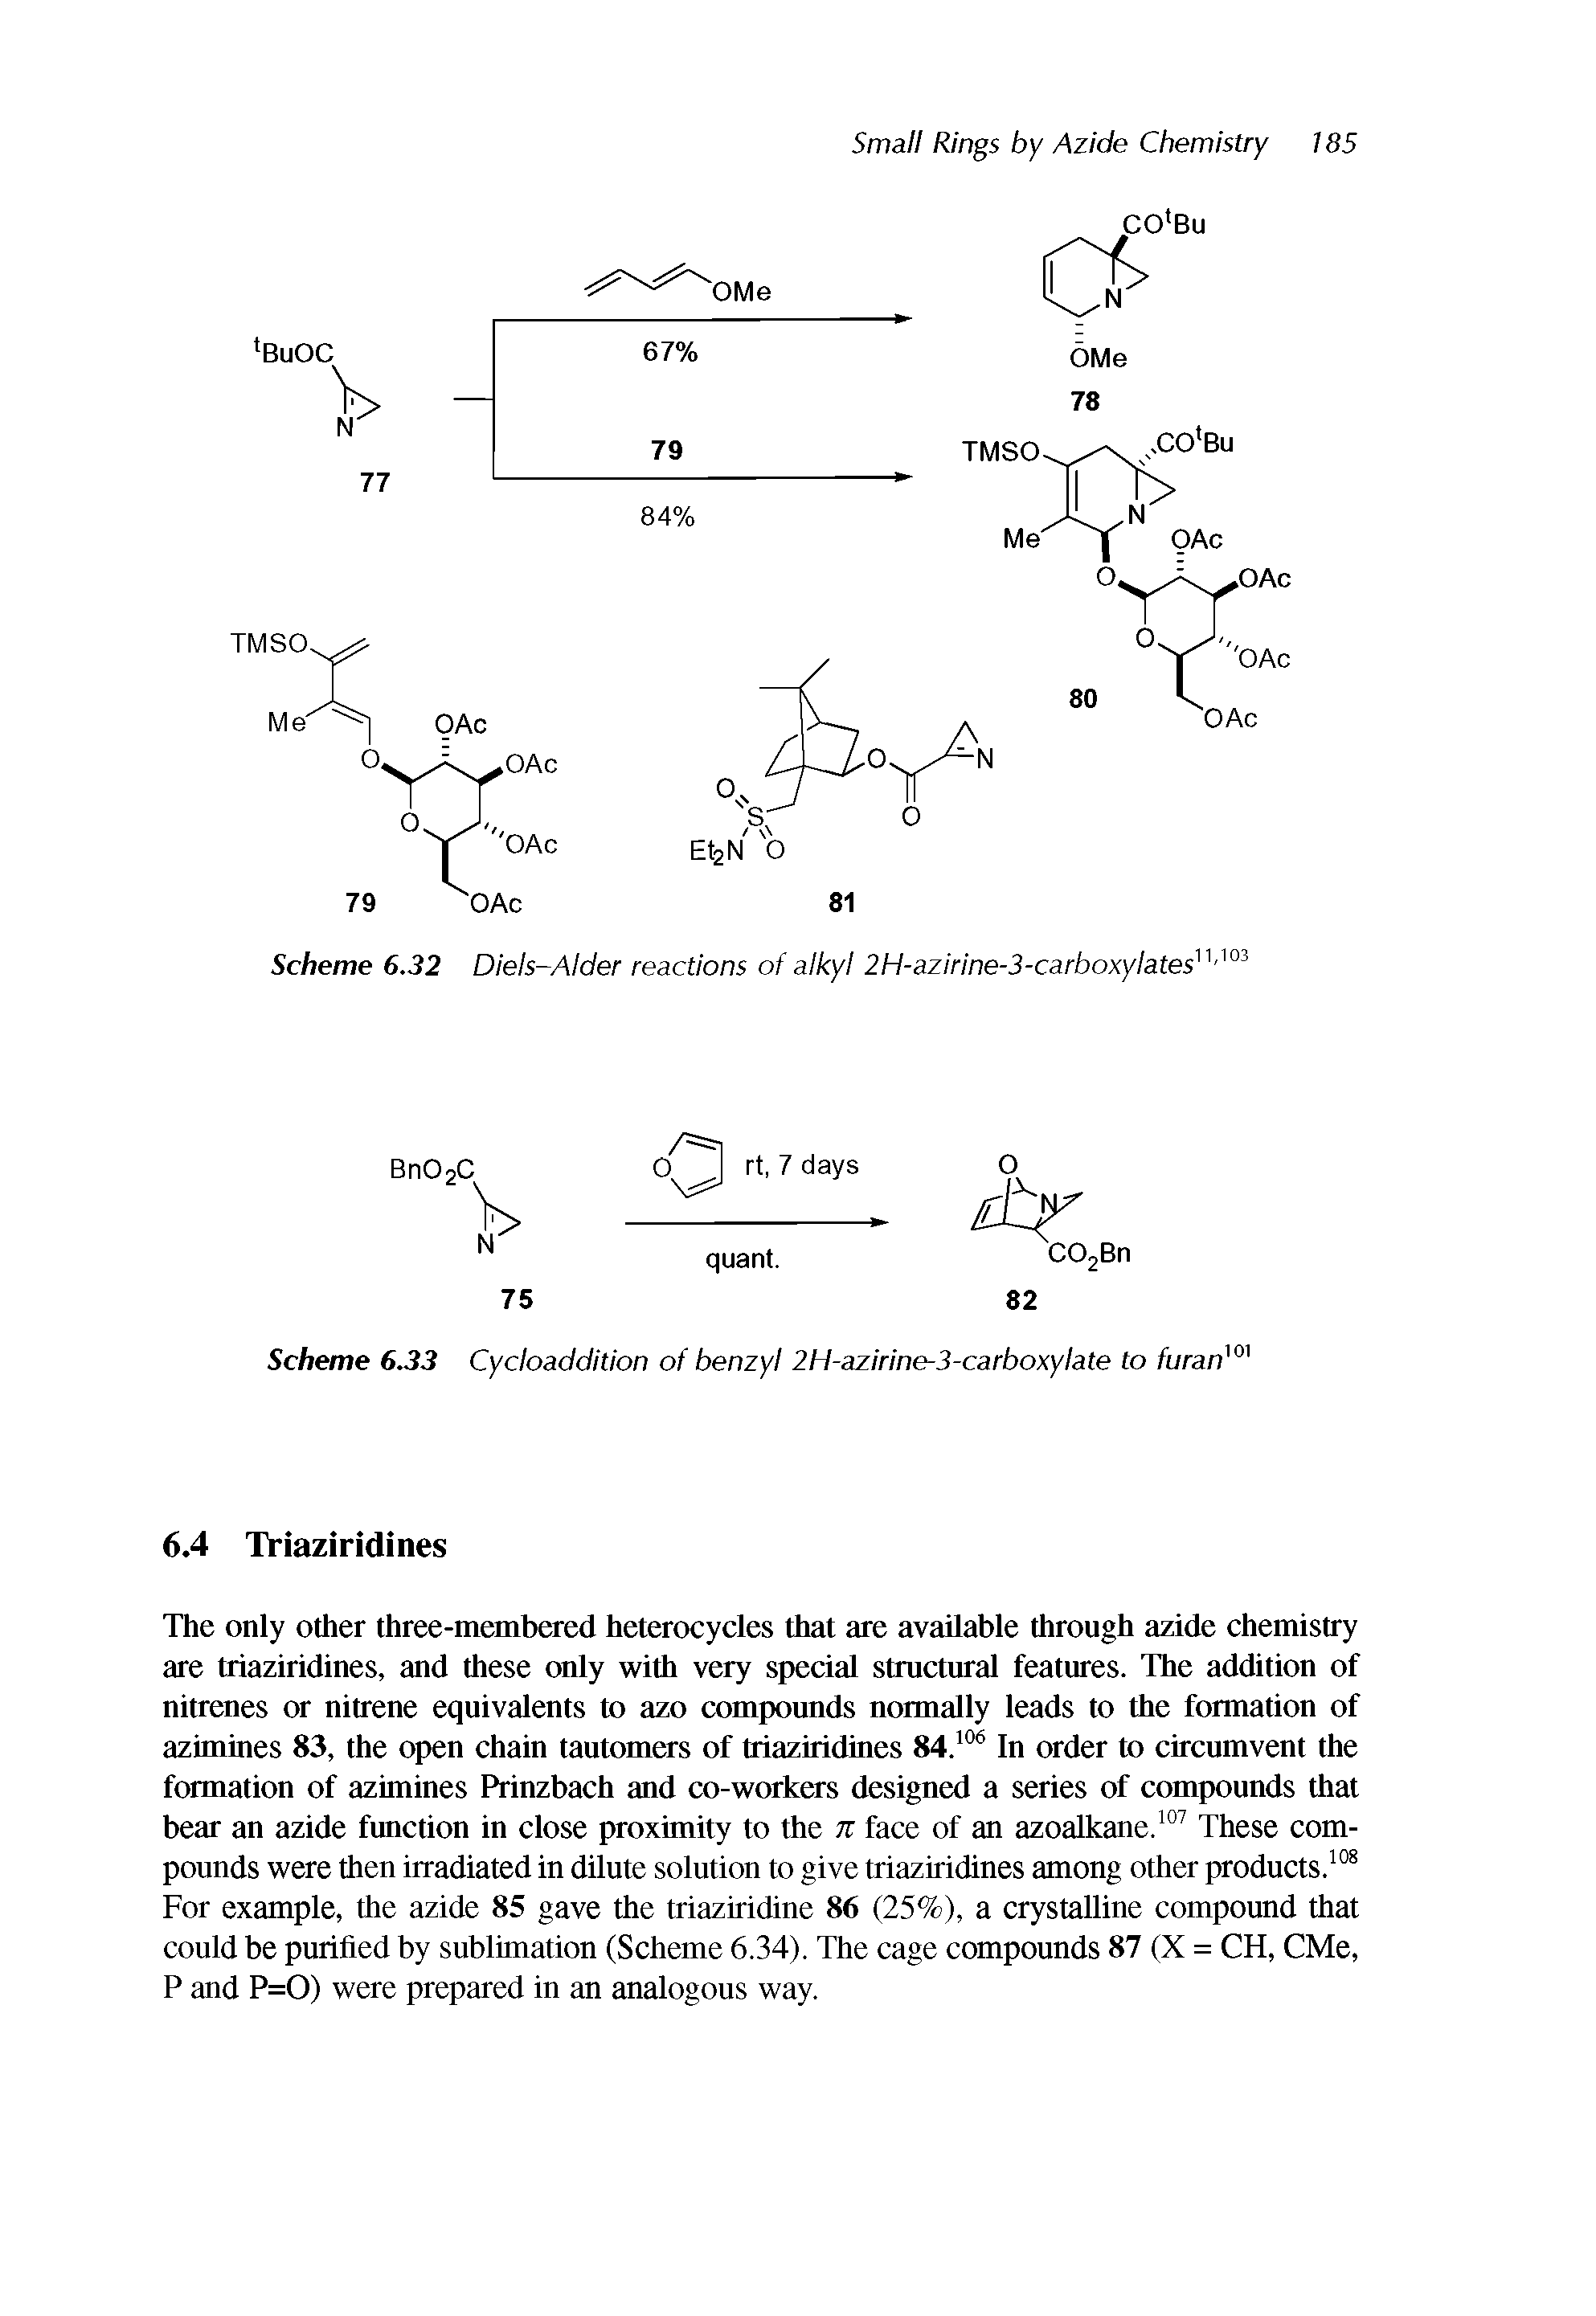 Scheme 6.33 Cycloaddition of benzyl 2H-azirine-3-carboxylate to furan ° ...